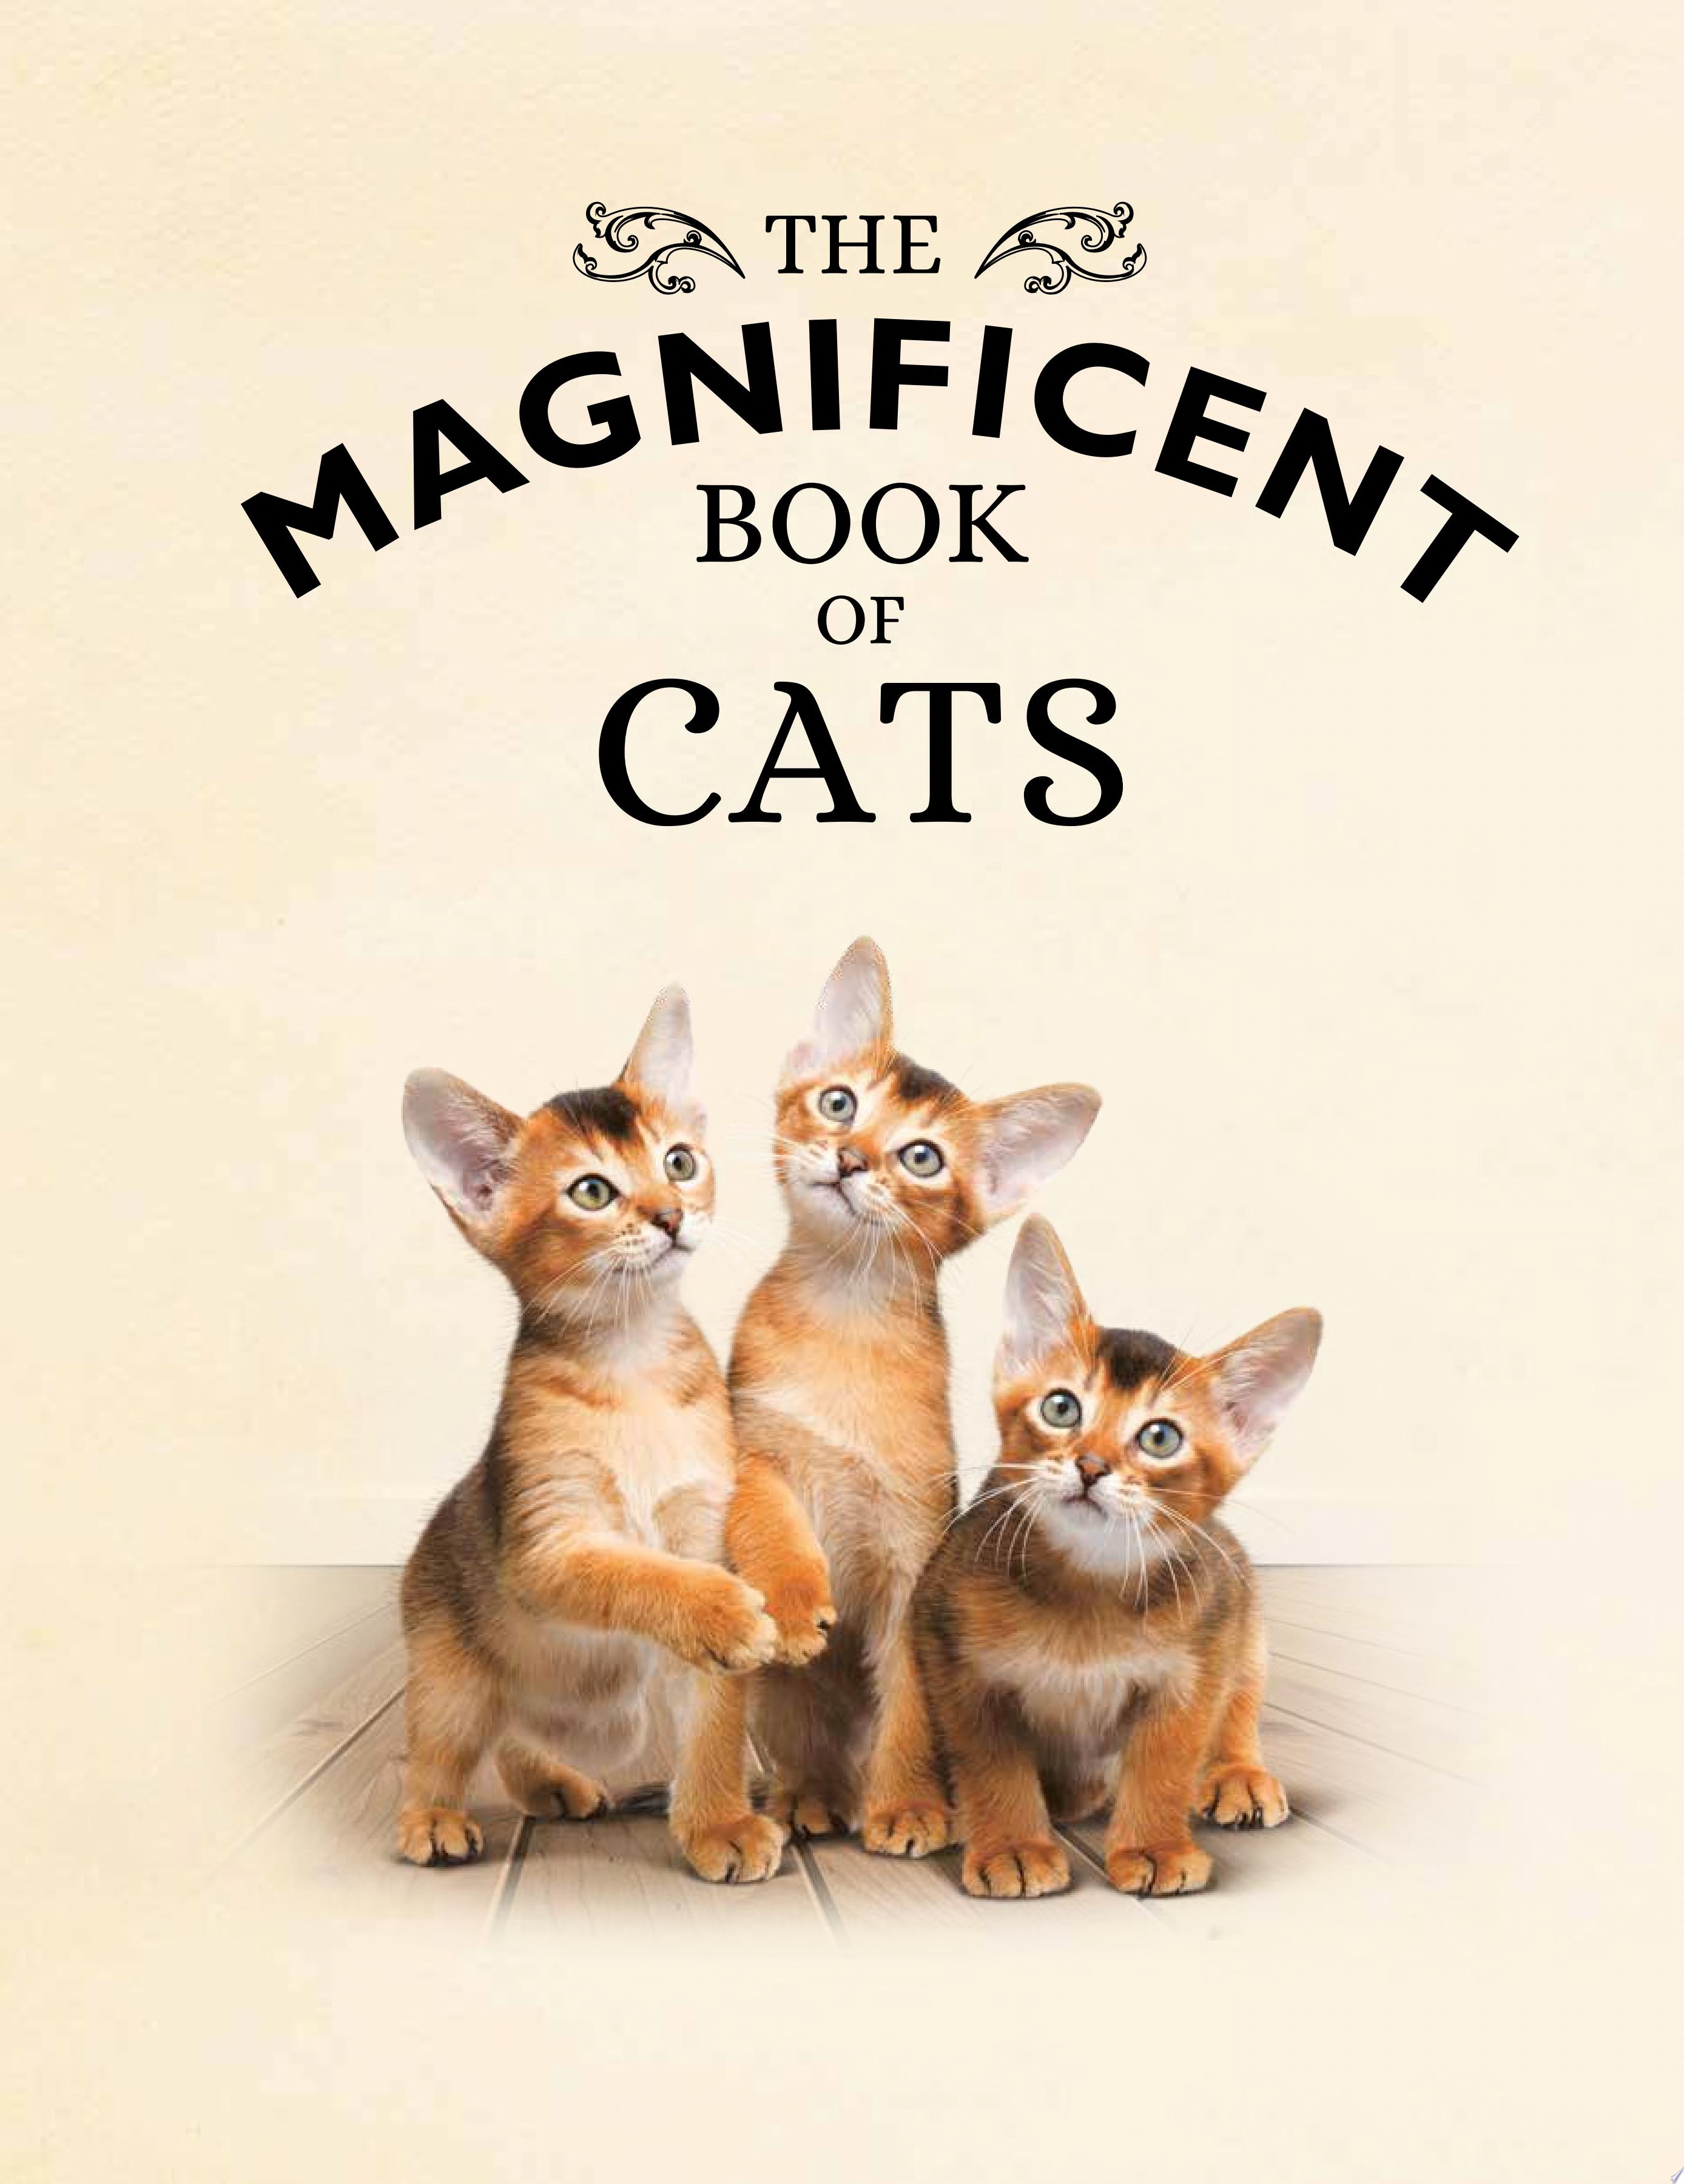 The Magnificent Book of Cats: (Kids Books About Cats, Middle Grade Cat Books, Books About Animals) [Book]